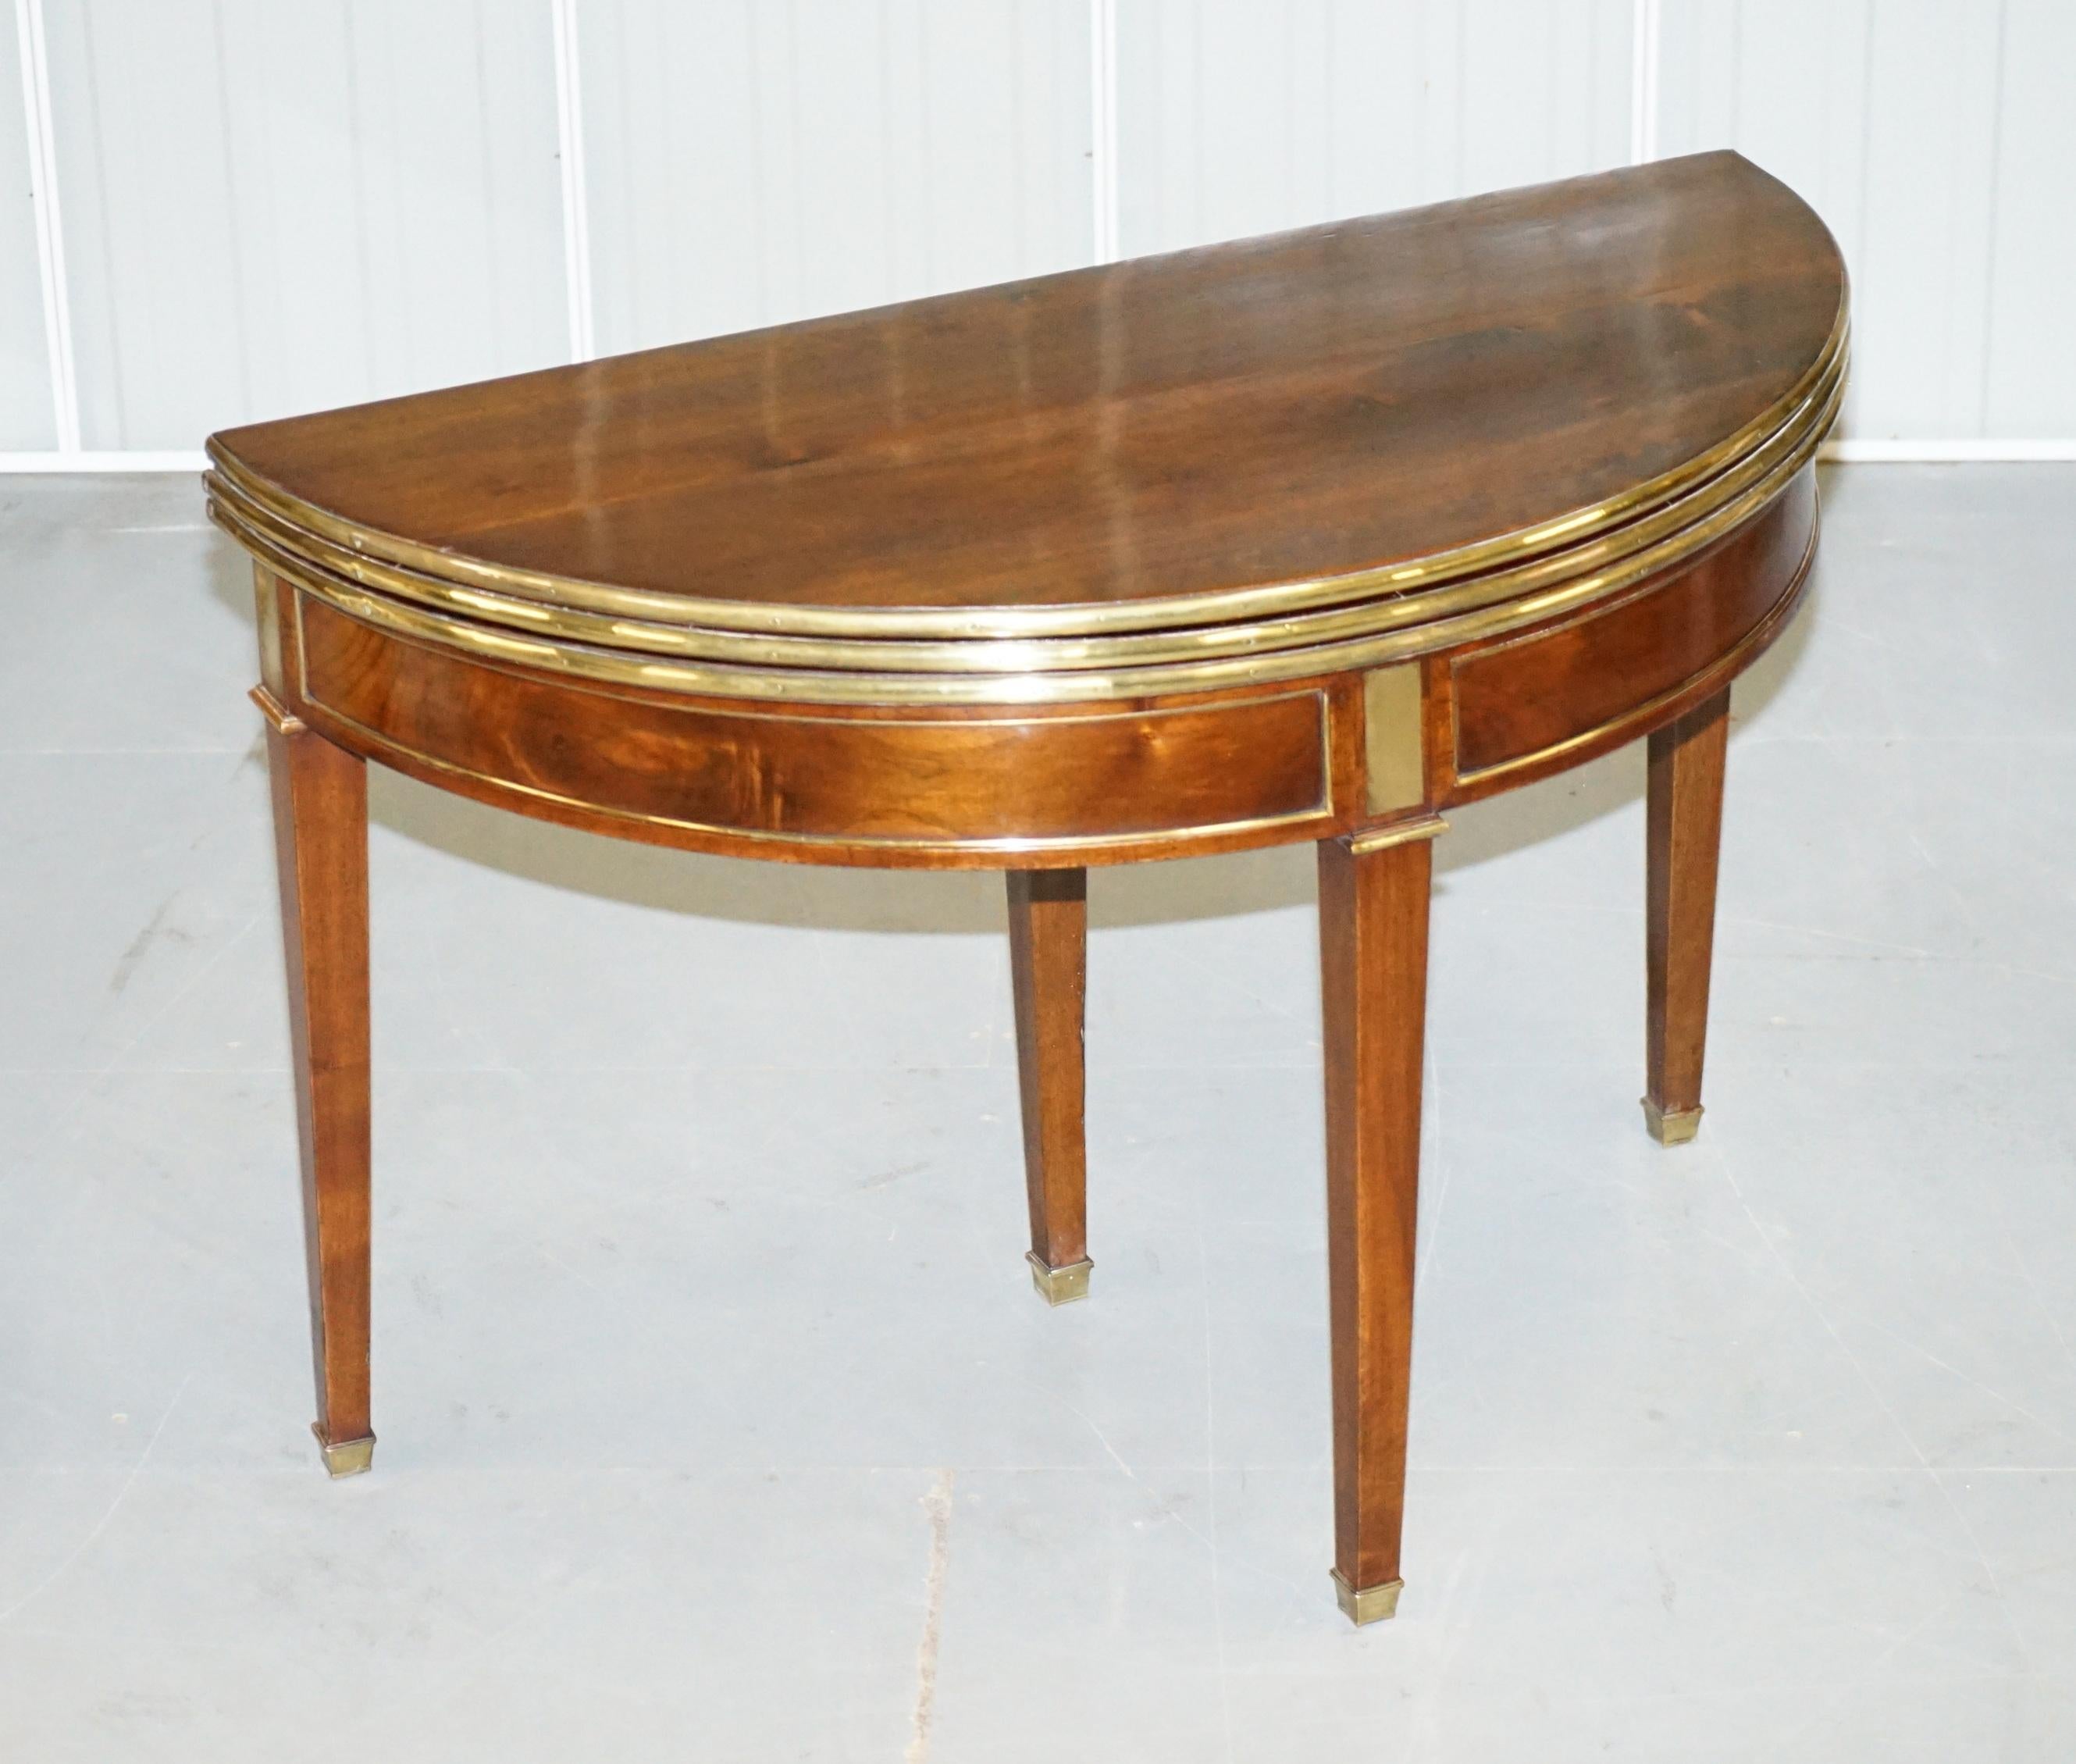 We are delighted to offer for sale this absolutely exquisite fully restored circa 1760-1780 French Directorie Demi Lune Extending games card table

This is a truly very high quality piece. I purchased it from an exhibition in Belgium, it was